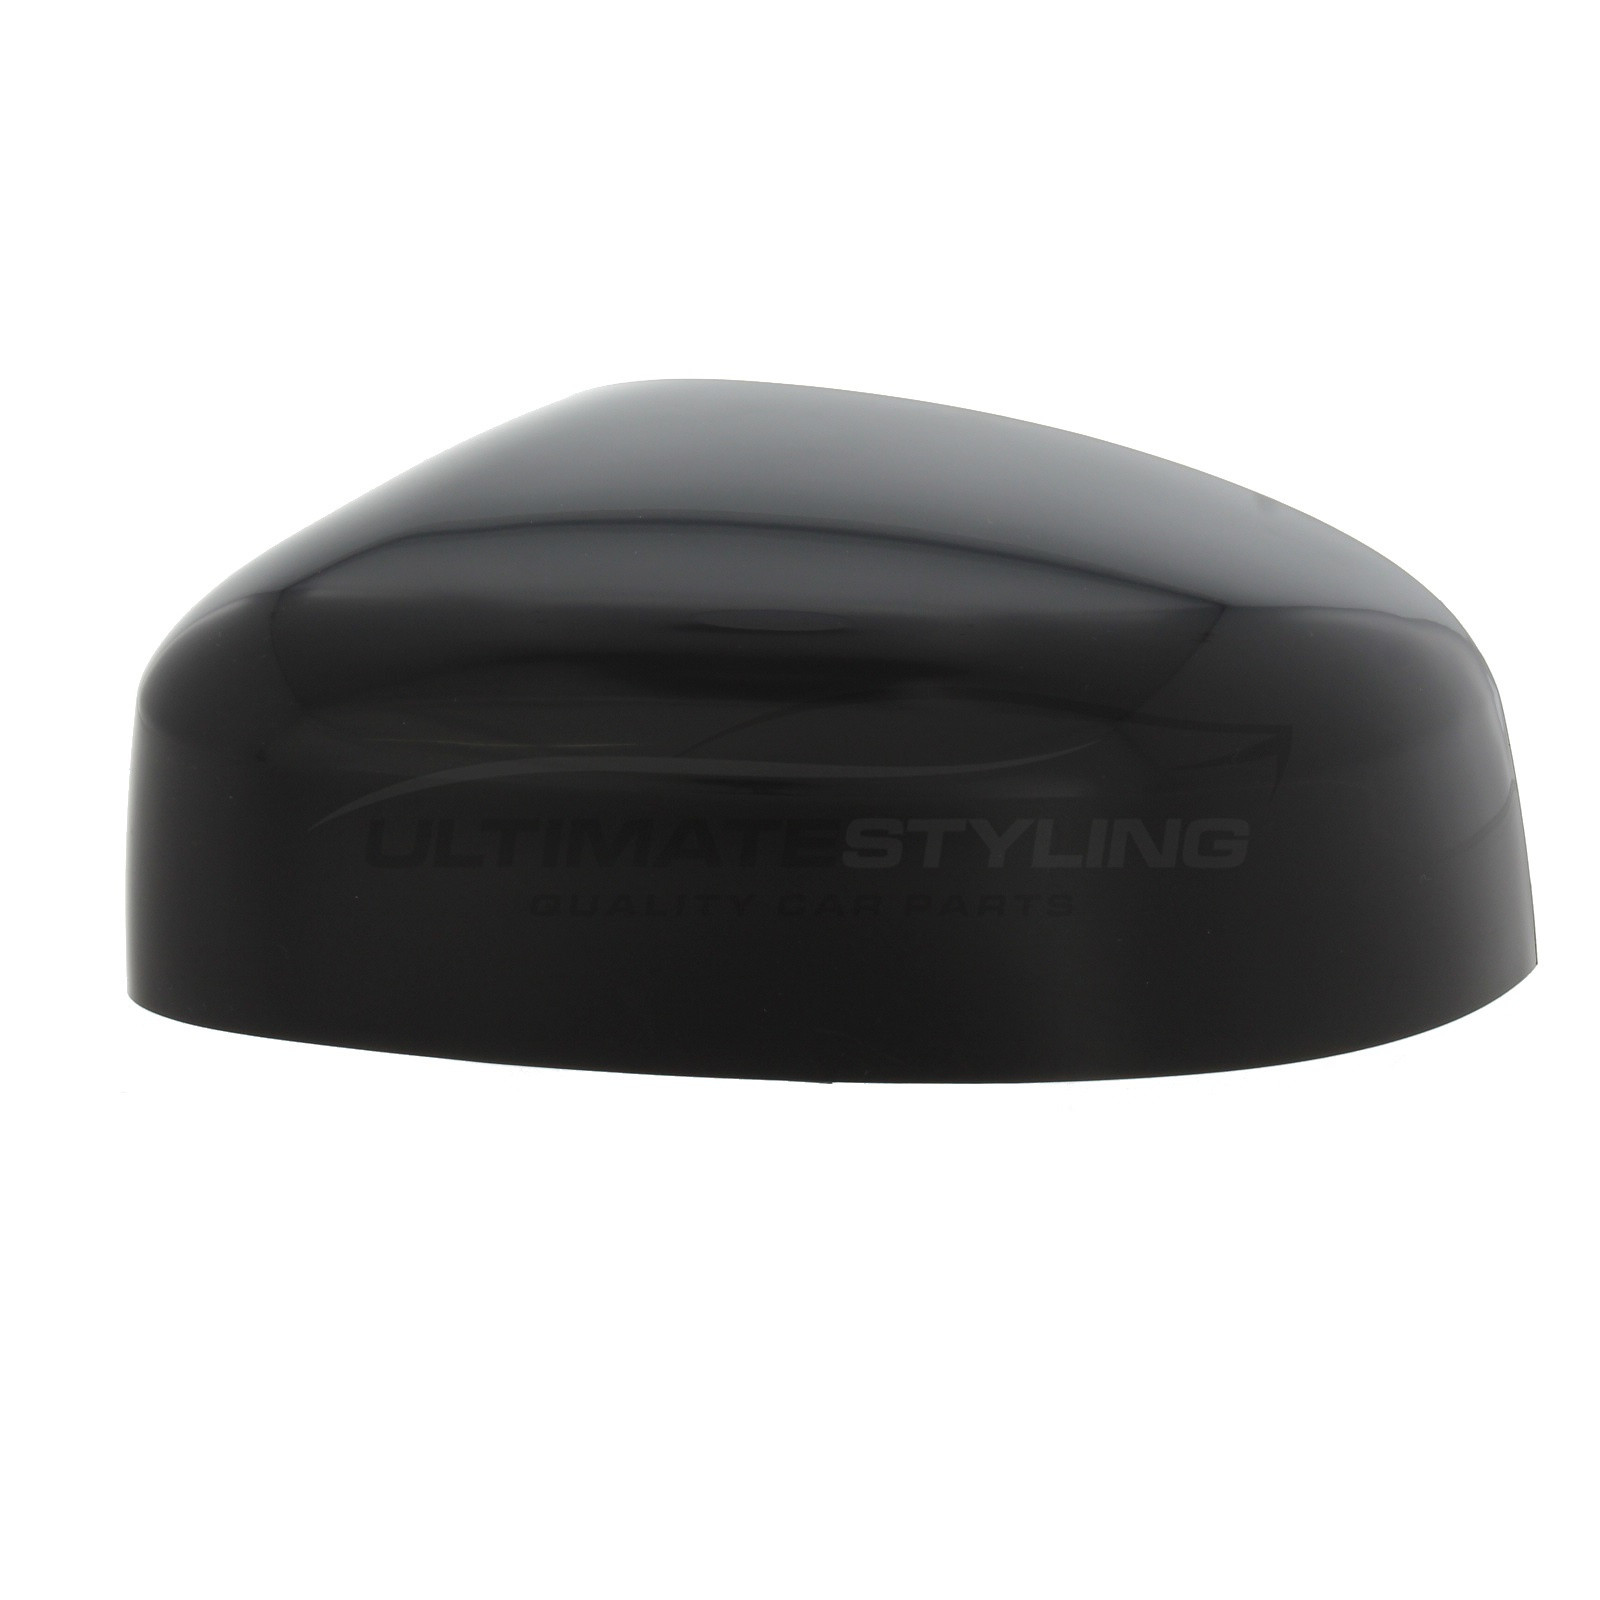 Ford Focus 2004-2018, Ford Mondeo 2011-2015 Wing Mirror Cover Cap Casing Gloss Black Passenger Side (LH)